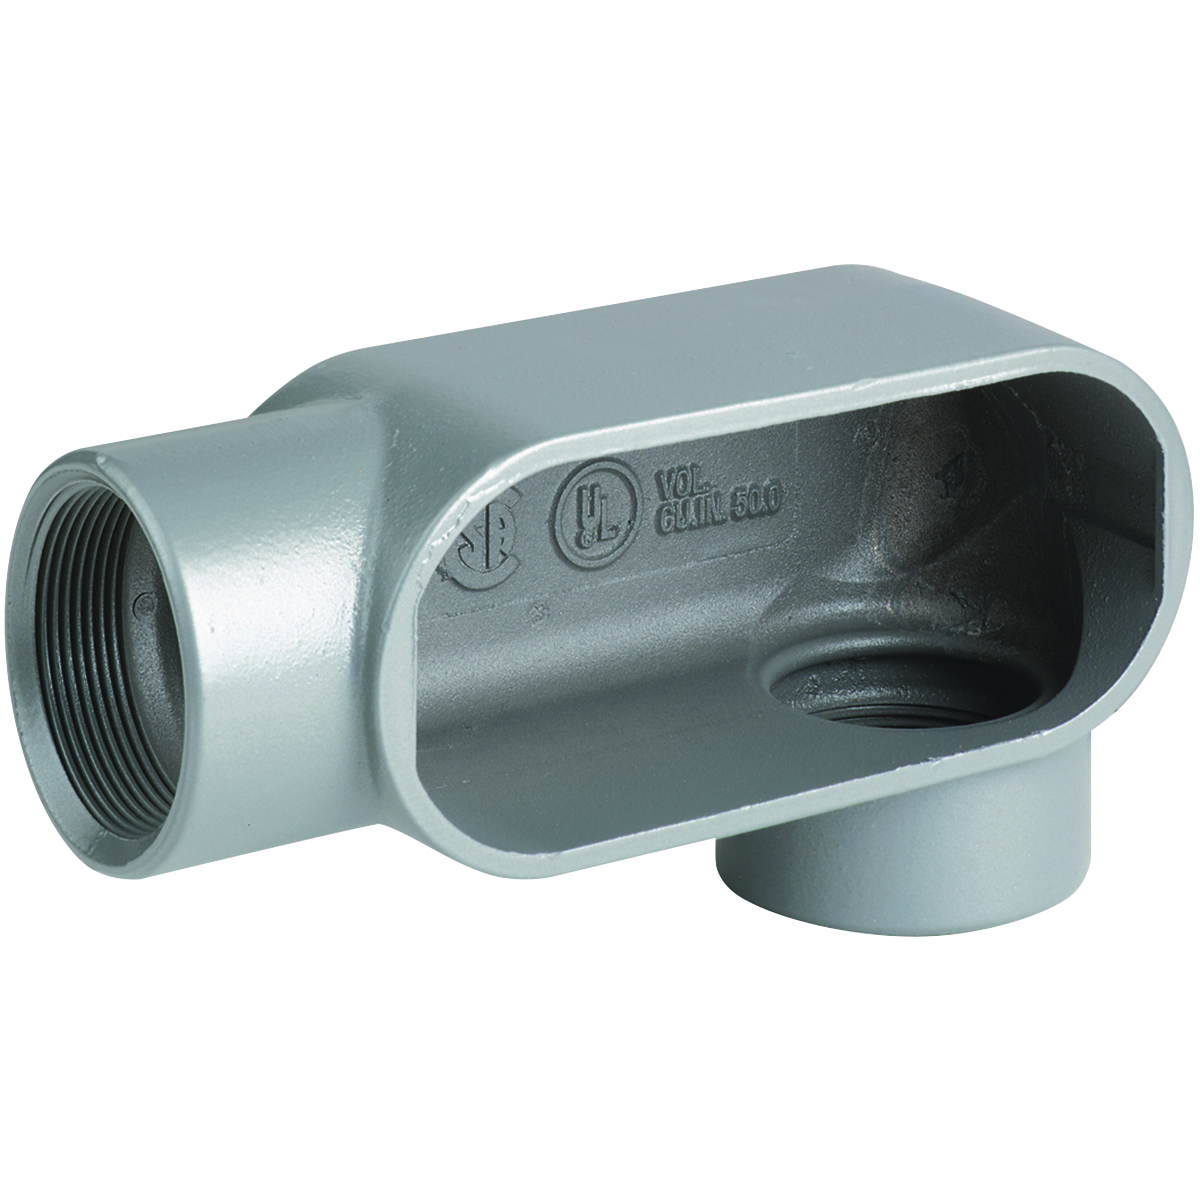 DURALOY 7 SERIES - IRON CONDUIT BODY - LL TYPE - HUB SIZE 1-1/4 INCH -VOLUME 19.5 CUBIC INCHES